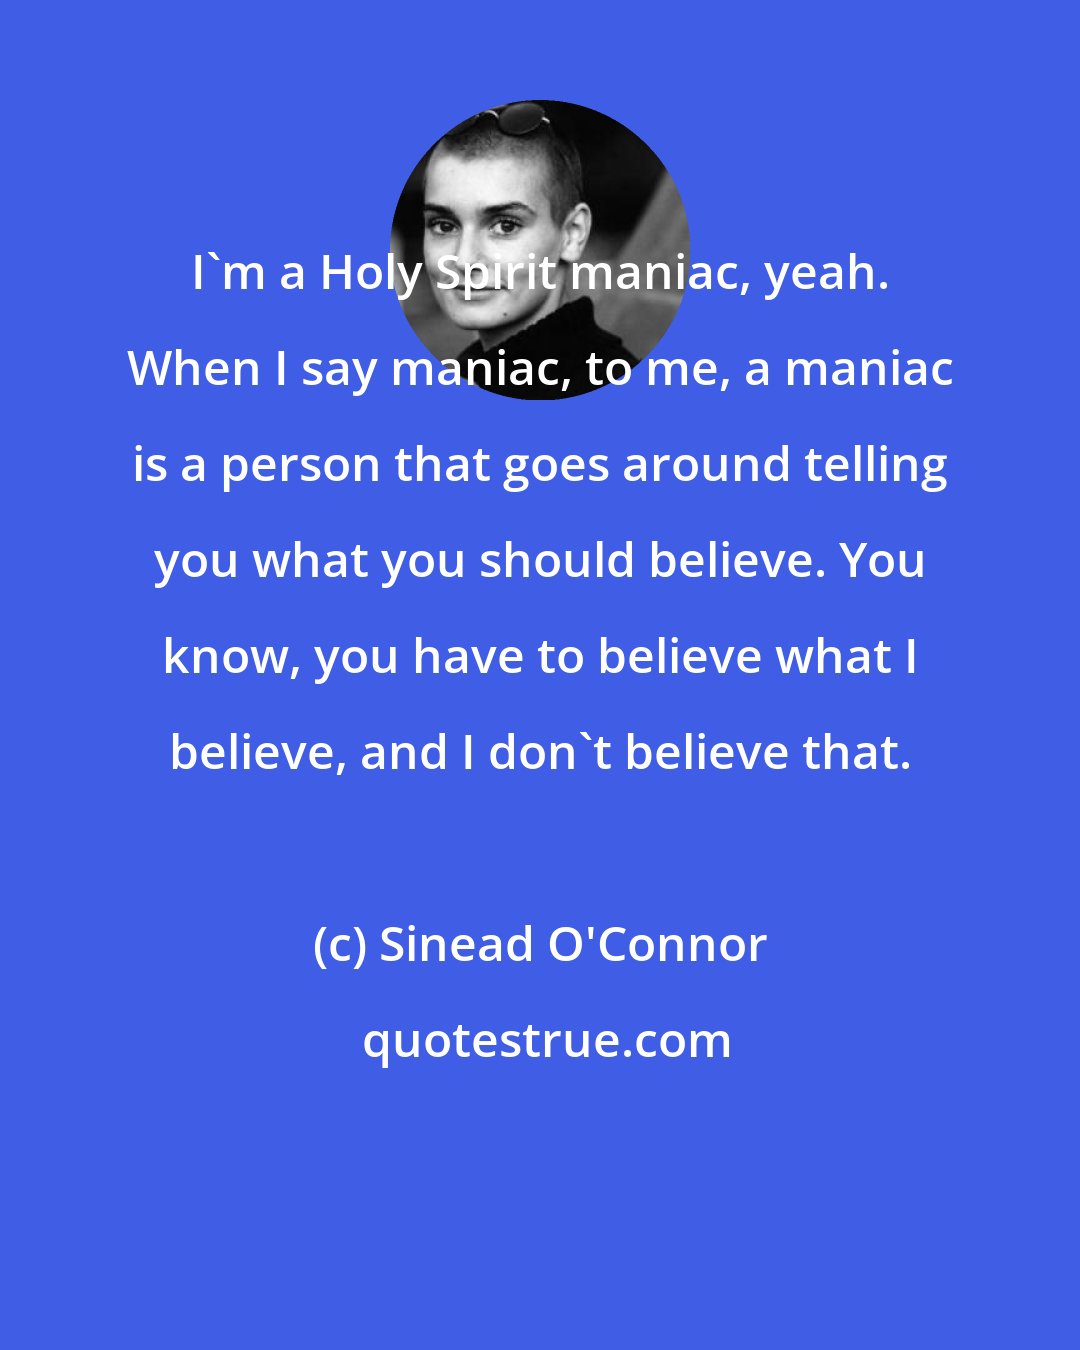 Sinead O'Connor: I'm a Holy Spirit maniac, yeah. When I say maniac, to me, a maniac is a person that goes around telling you what you should believe. You know, you have to believe what I believe, and I don't believe that.